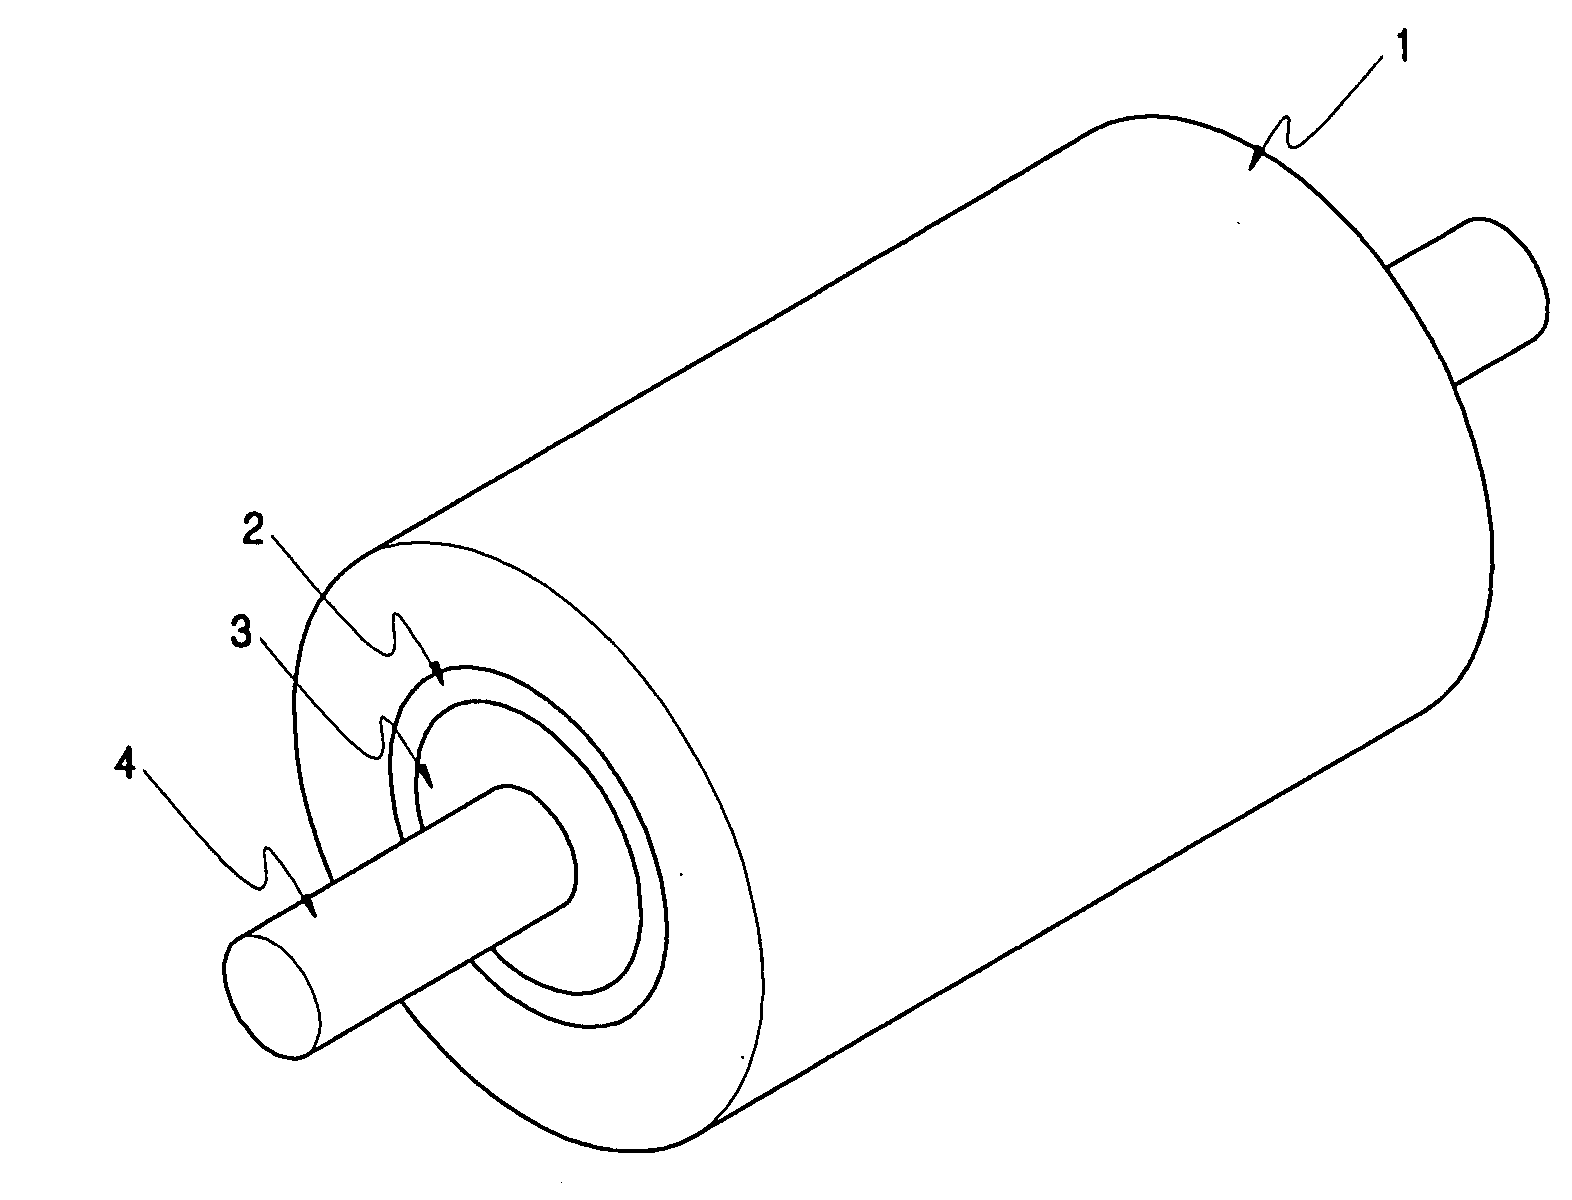 Rotor of brushless direct-current motor